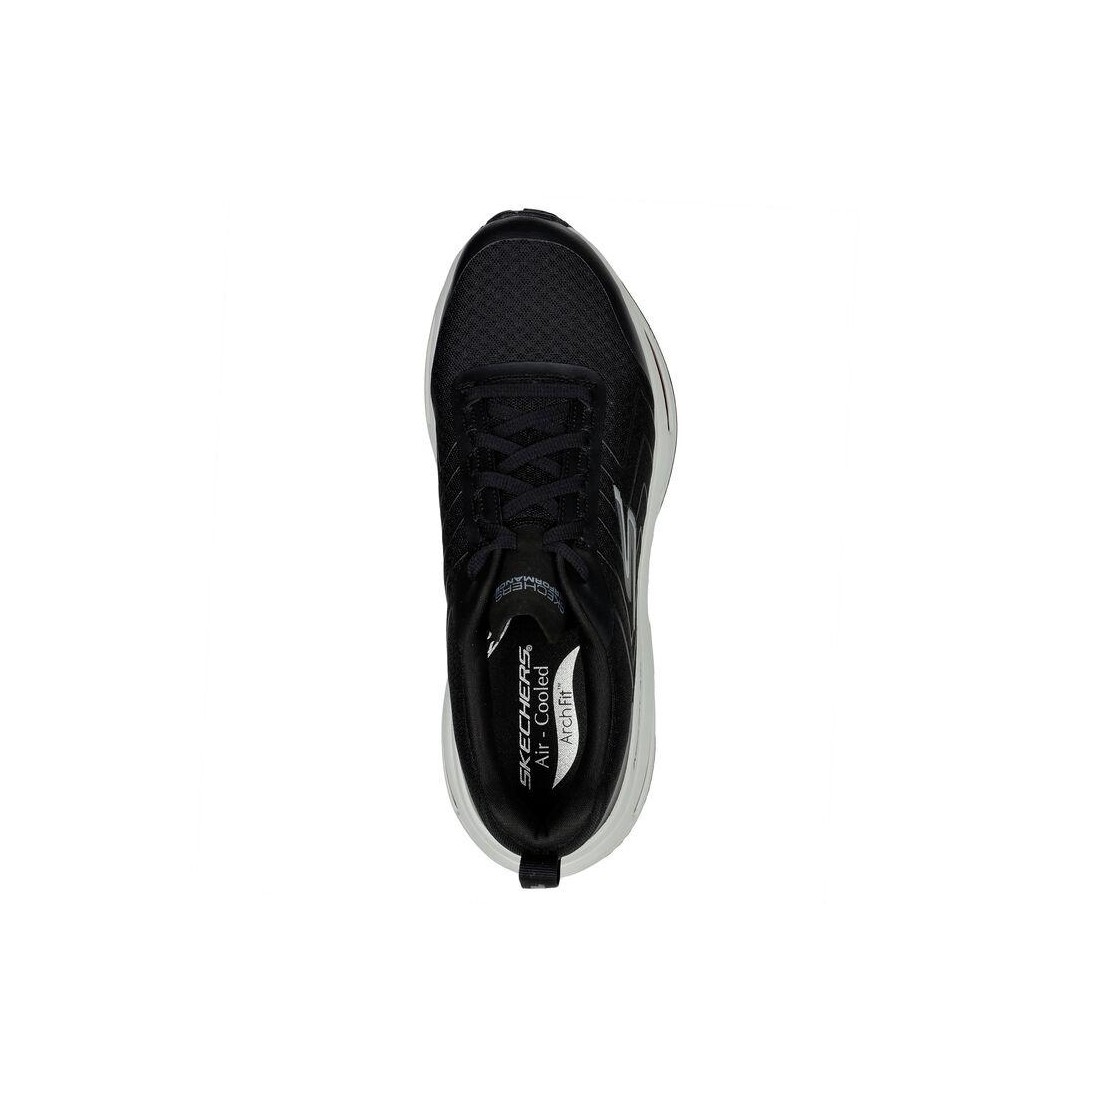 Giày Skechers Max Cushioning Arch Fit Air - Electron Nam Đen